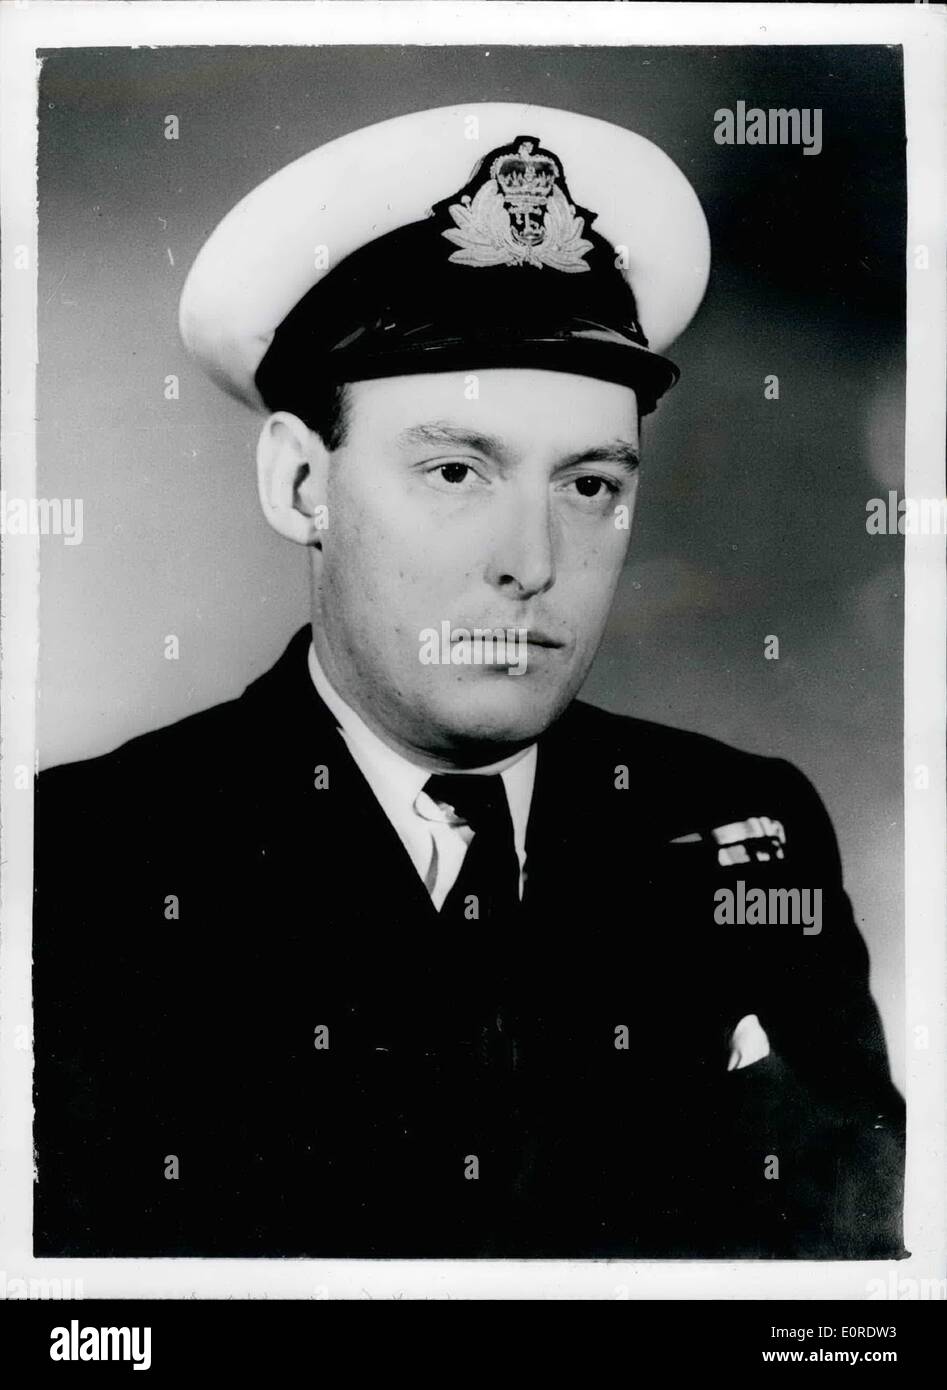 Mar. 24, 1959 - 24-3-59 Britain's first atomic submarine commander chosen. Lieut. Commander B.F.P. Samborne RN, who is at present training at the Royal Naval College, Greenwich, has been chosen as the Commanding Officer designate Britain's first nuclear powered submarine H.M.S. Dreadnought. He is 34. Photo Shows: Lieut. Commander B.F.P. Samborne R.N. Stock Photo